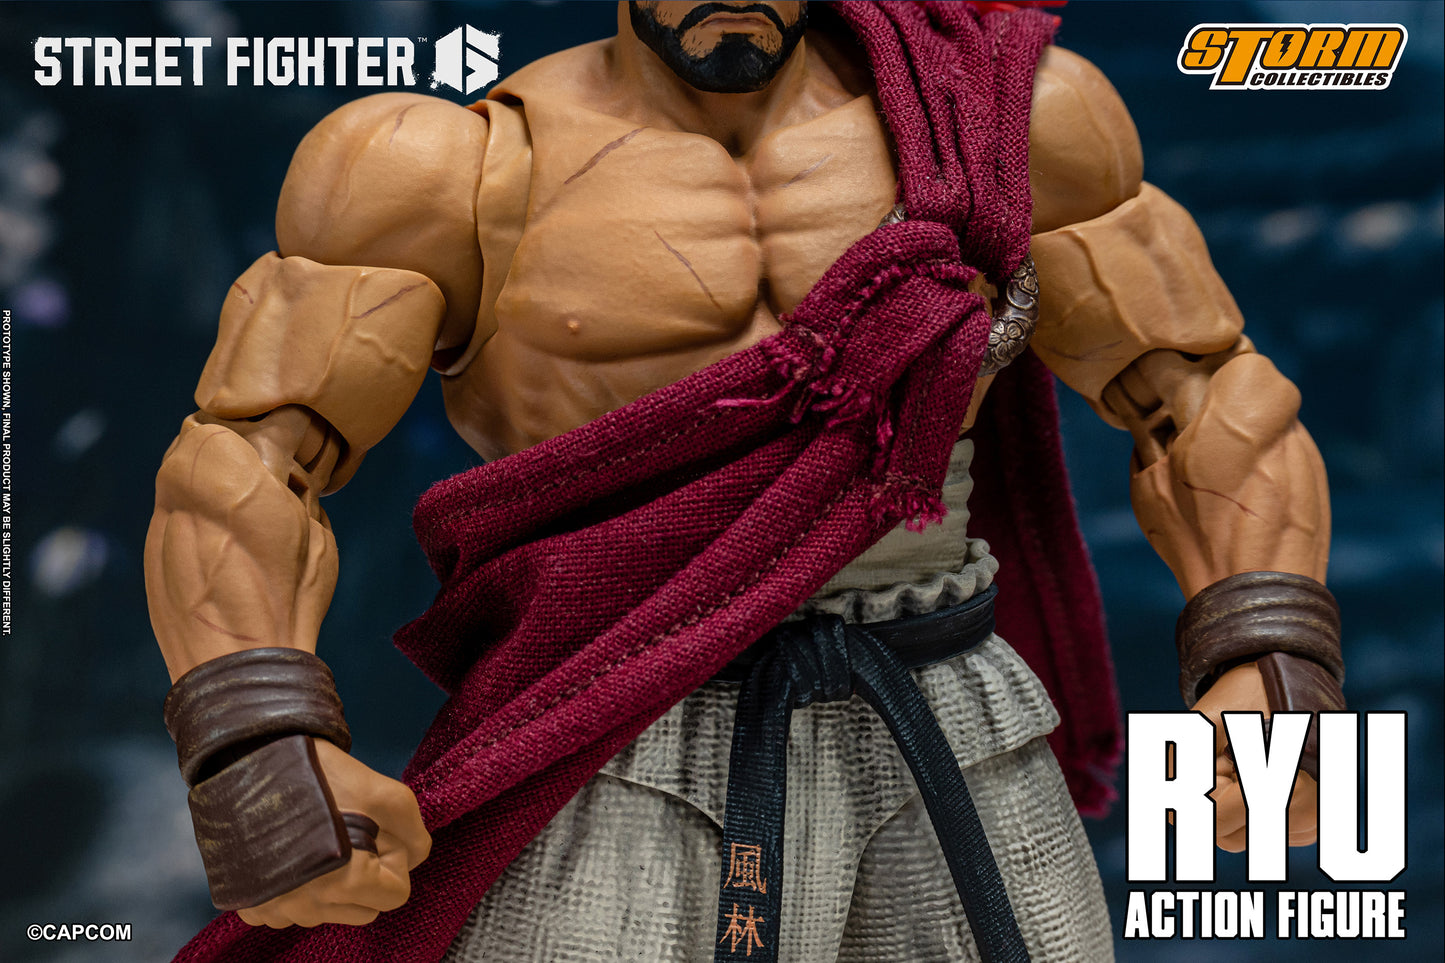 STORM COLL STREET FIGHTER 6 RYU